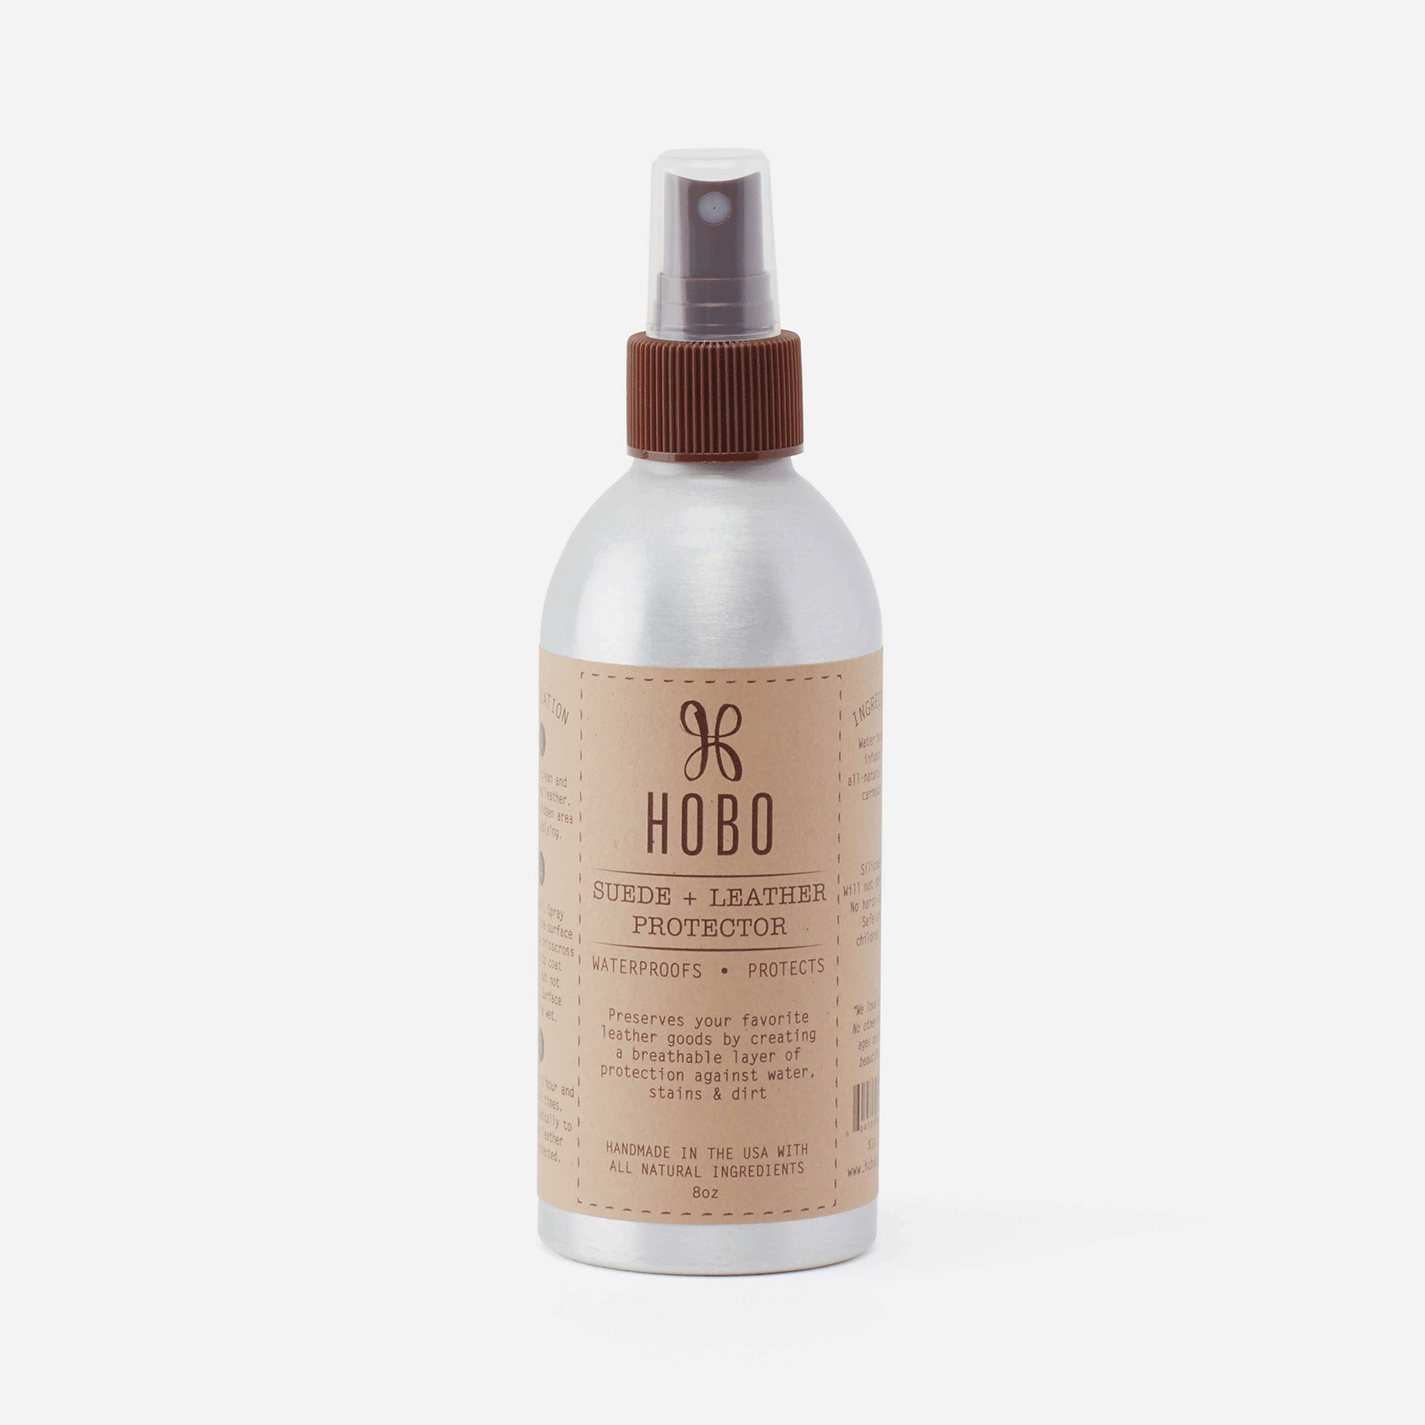 suede and leather protector spray bottle on a white background